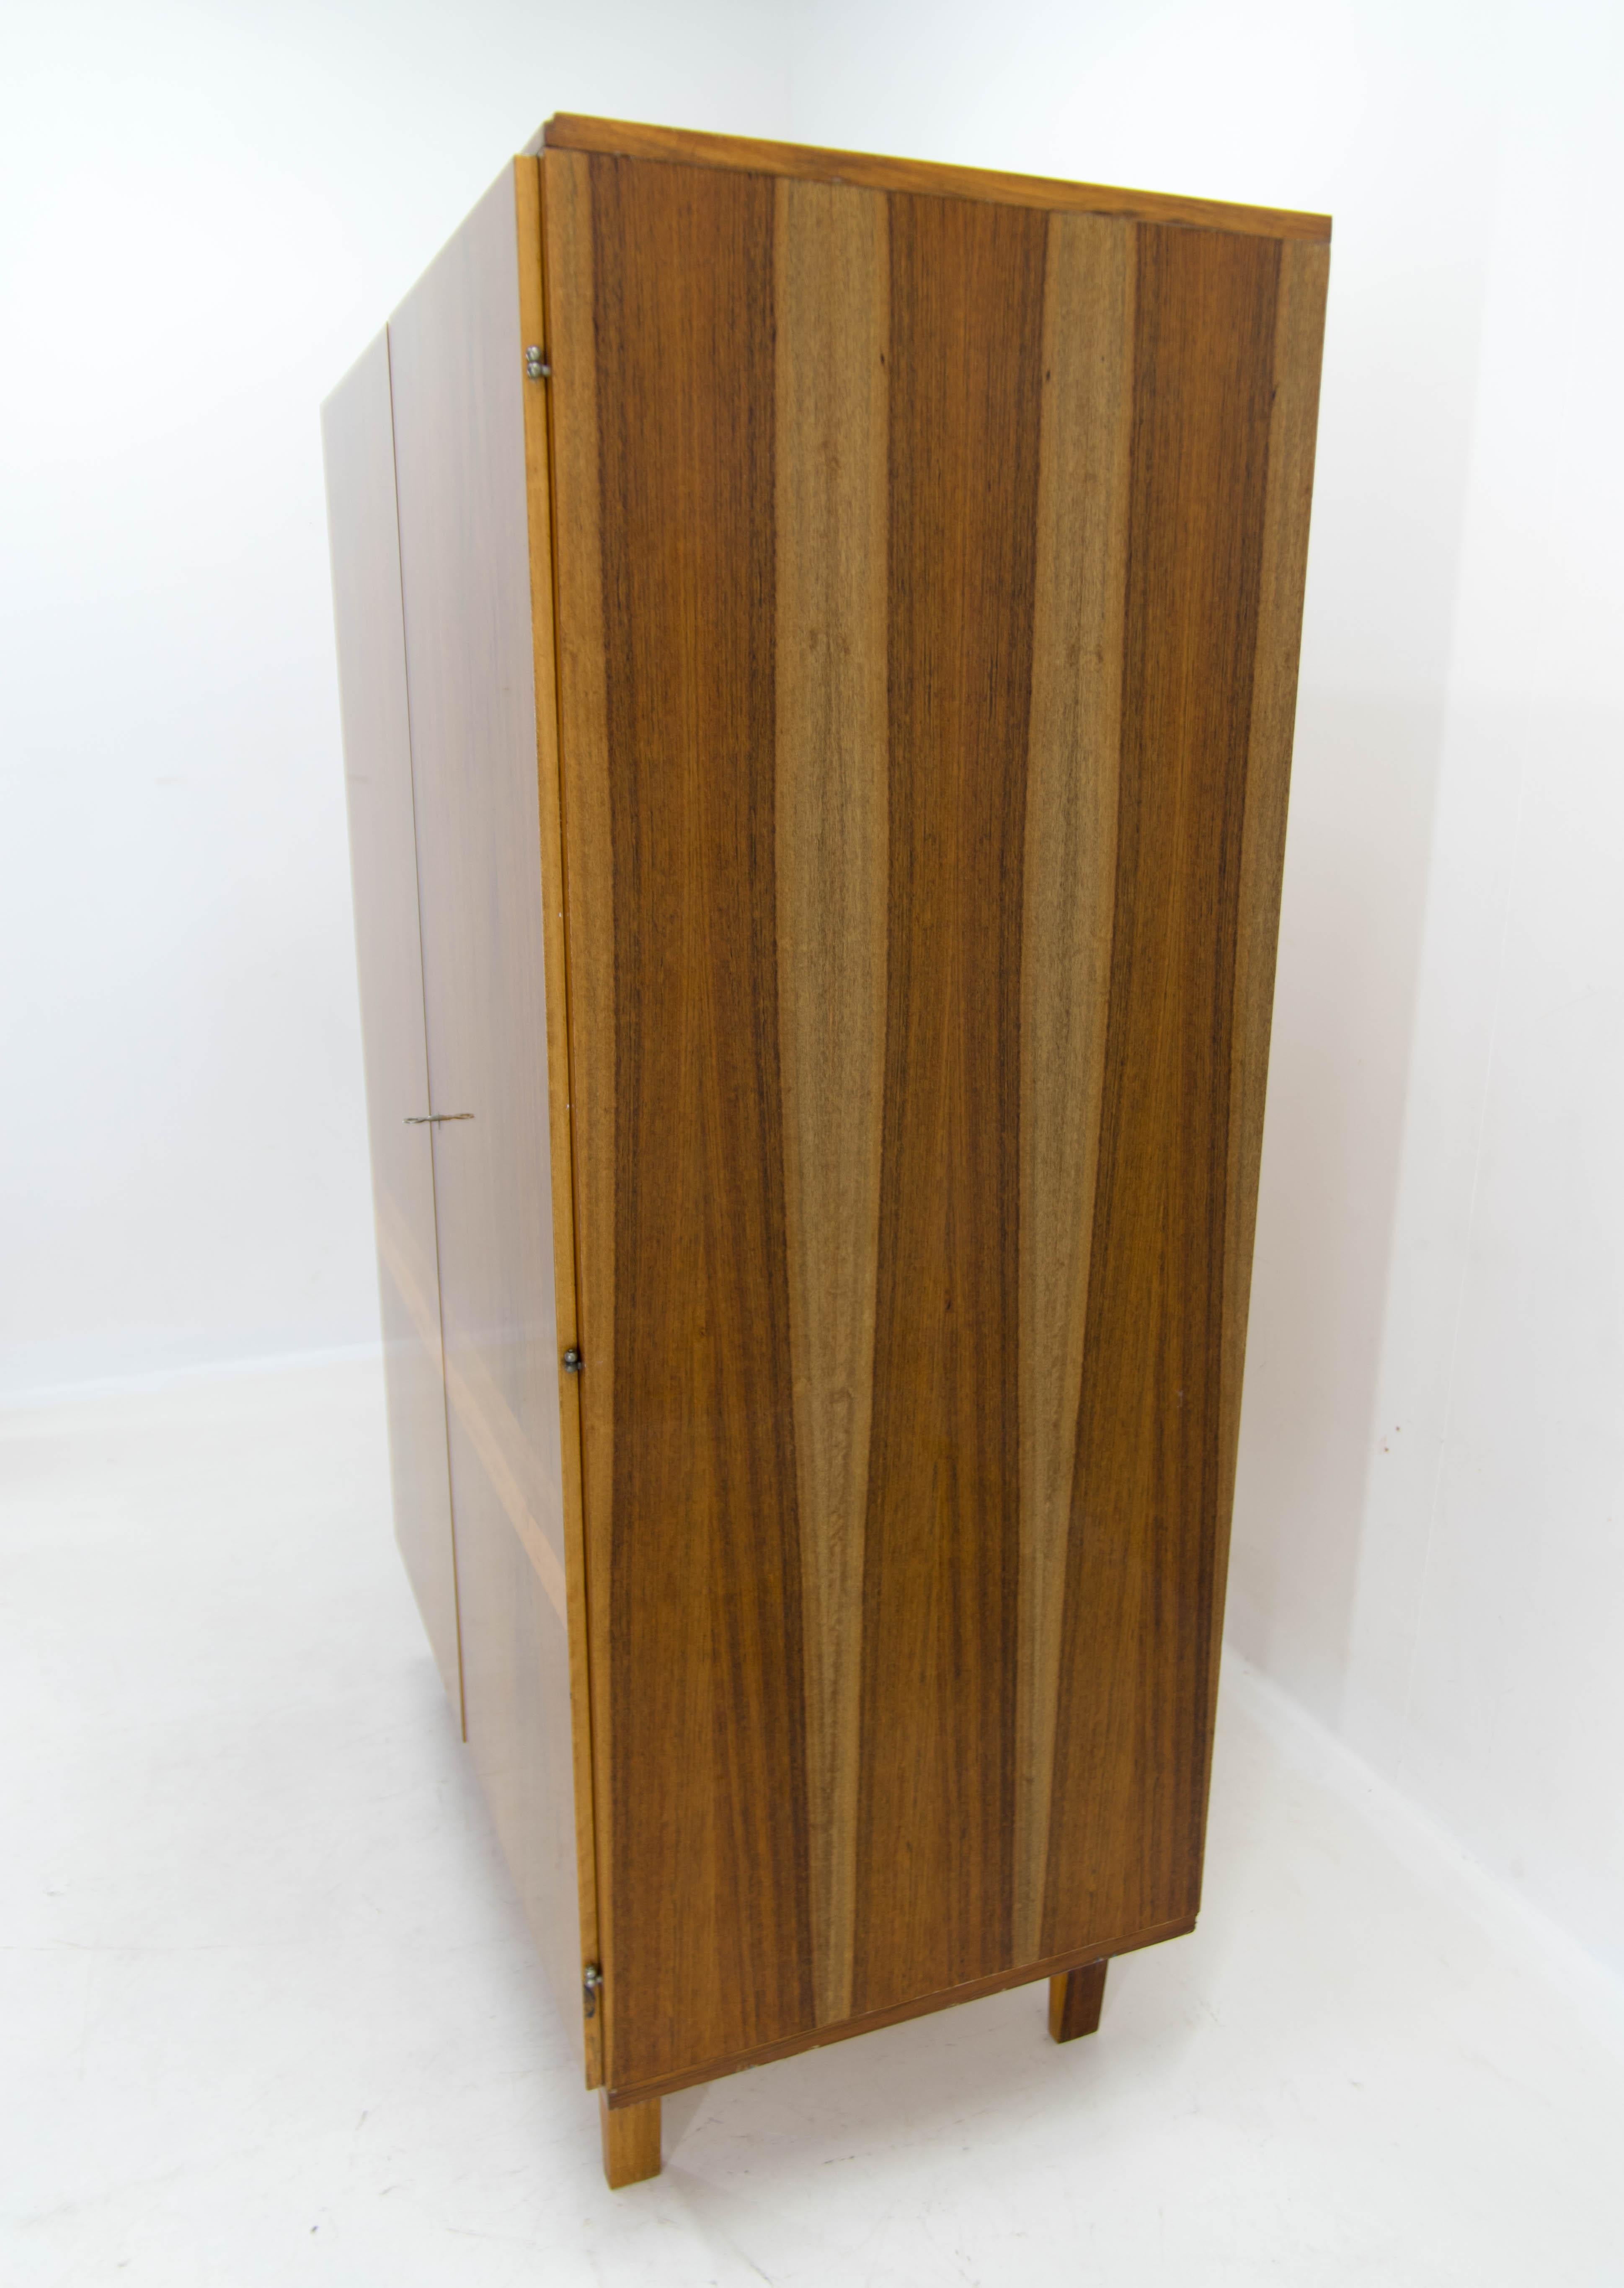 Czech Wardrobe with Shelves in High Gloss Finish by Mezulanik for Novy Domov, 1970s